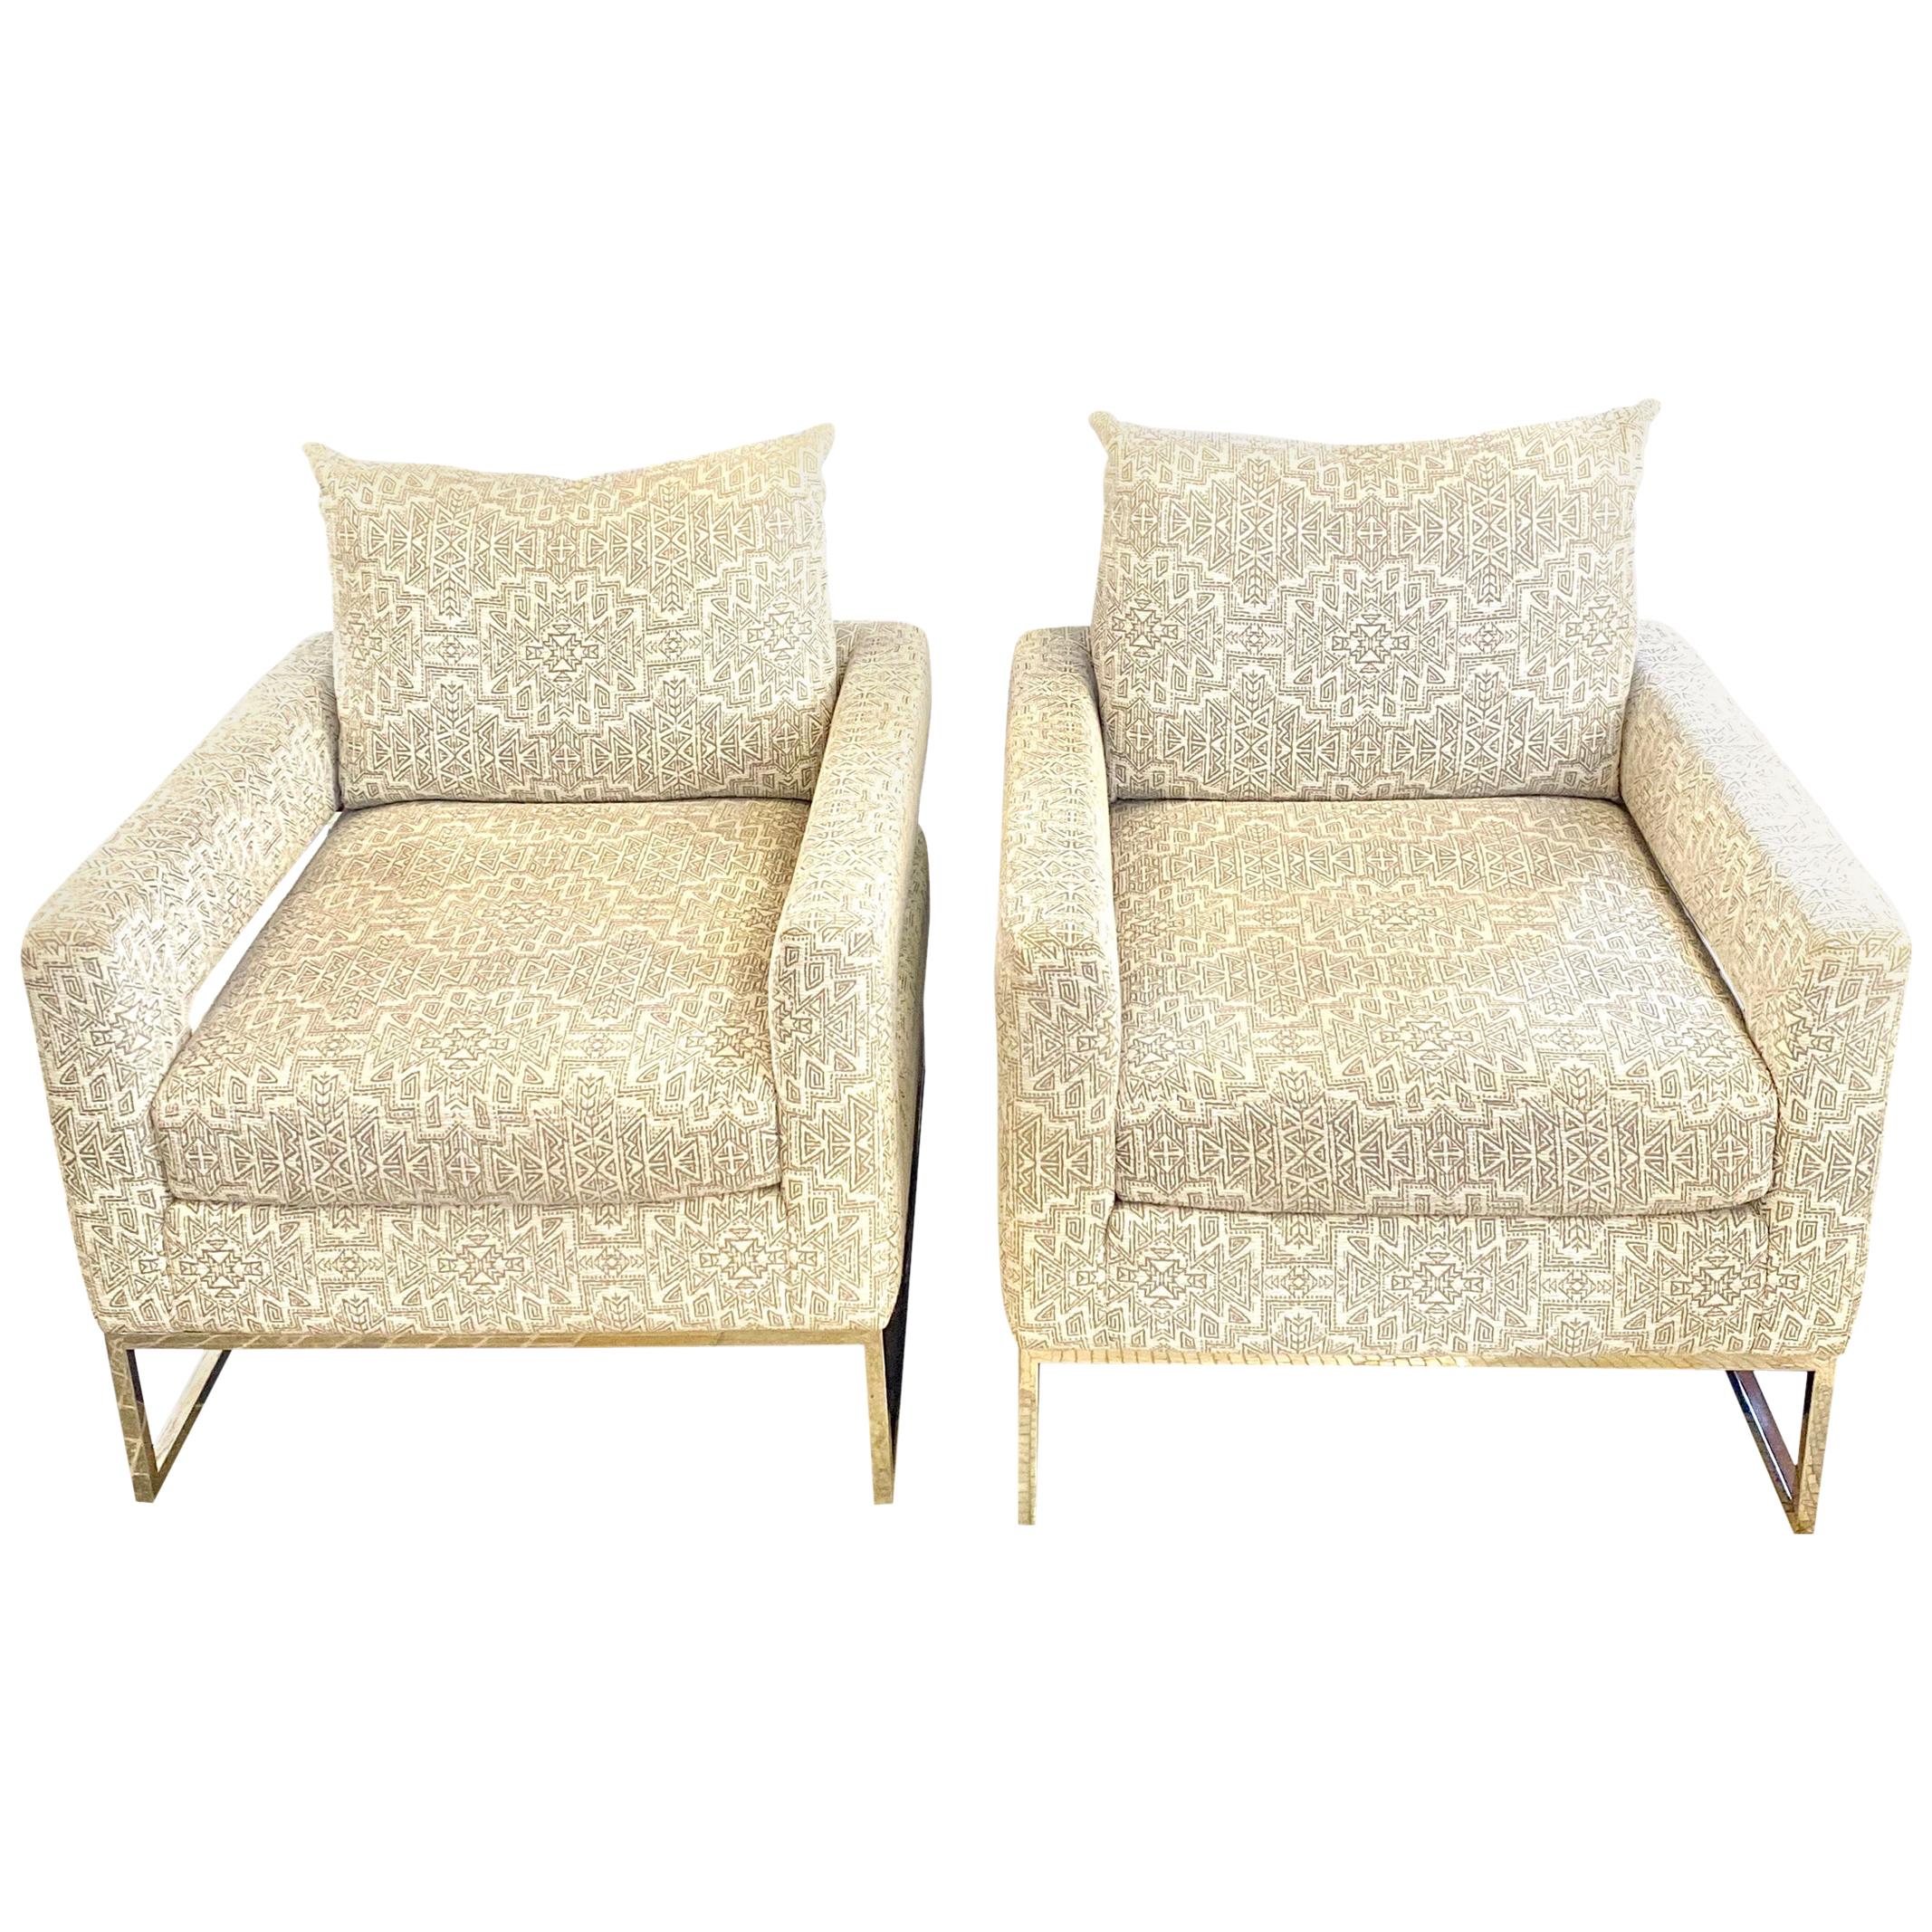 Pair of Gray/White Upholstered Lounge Chairs